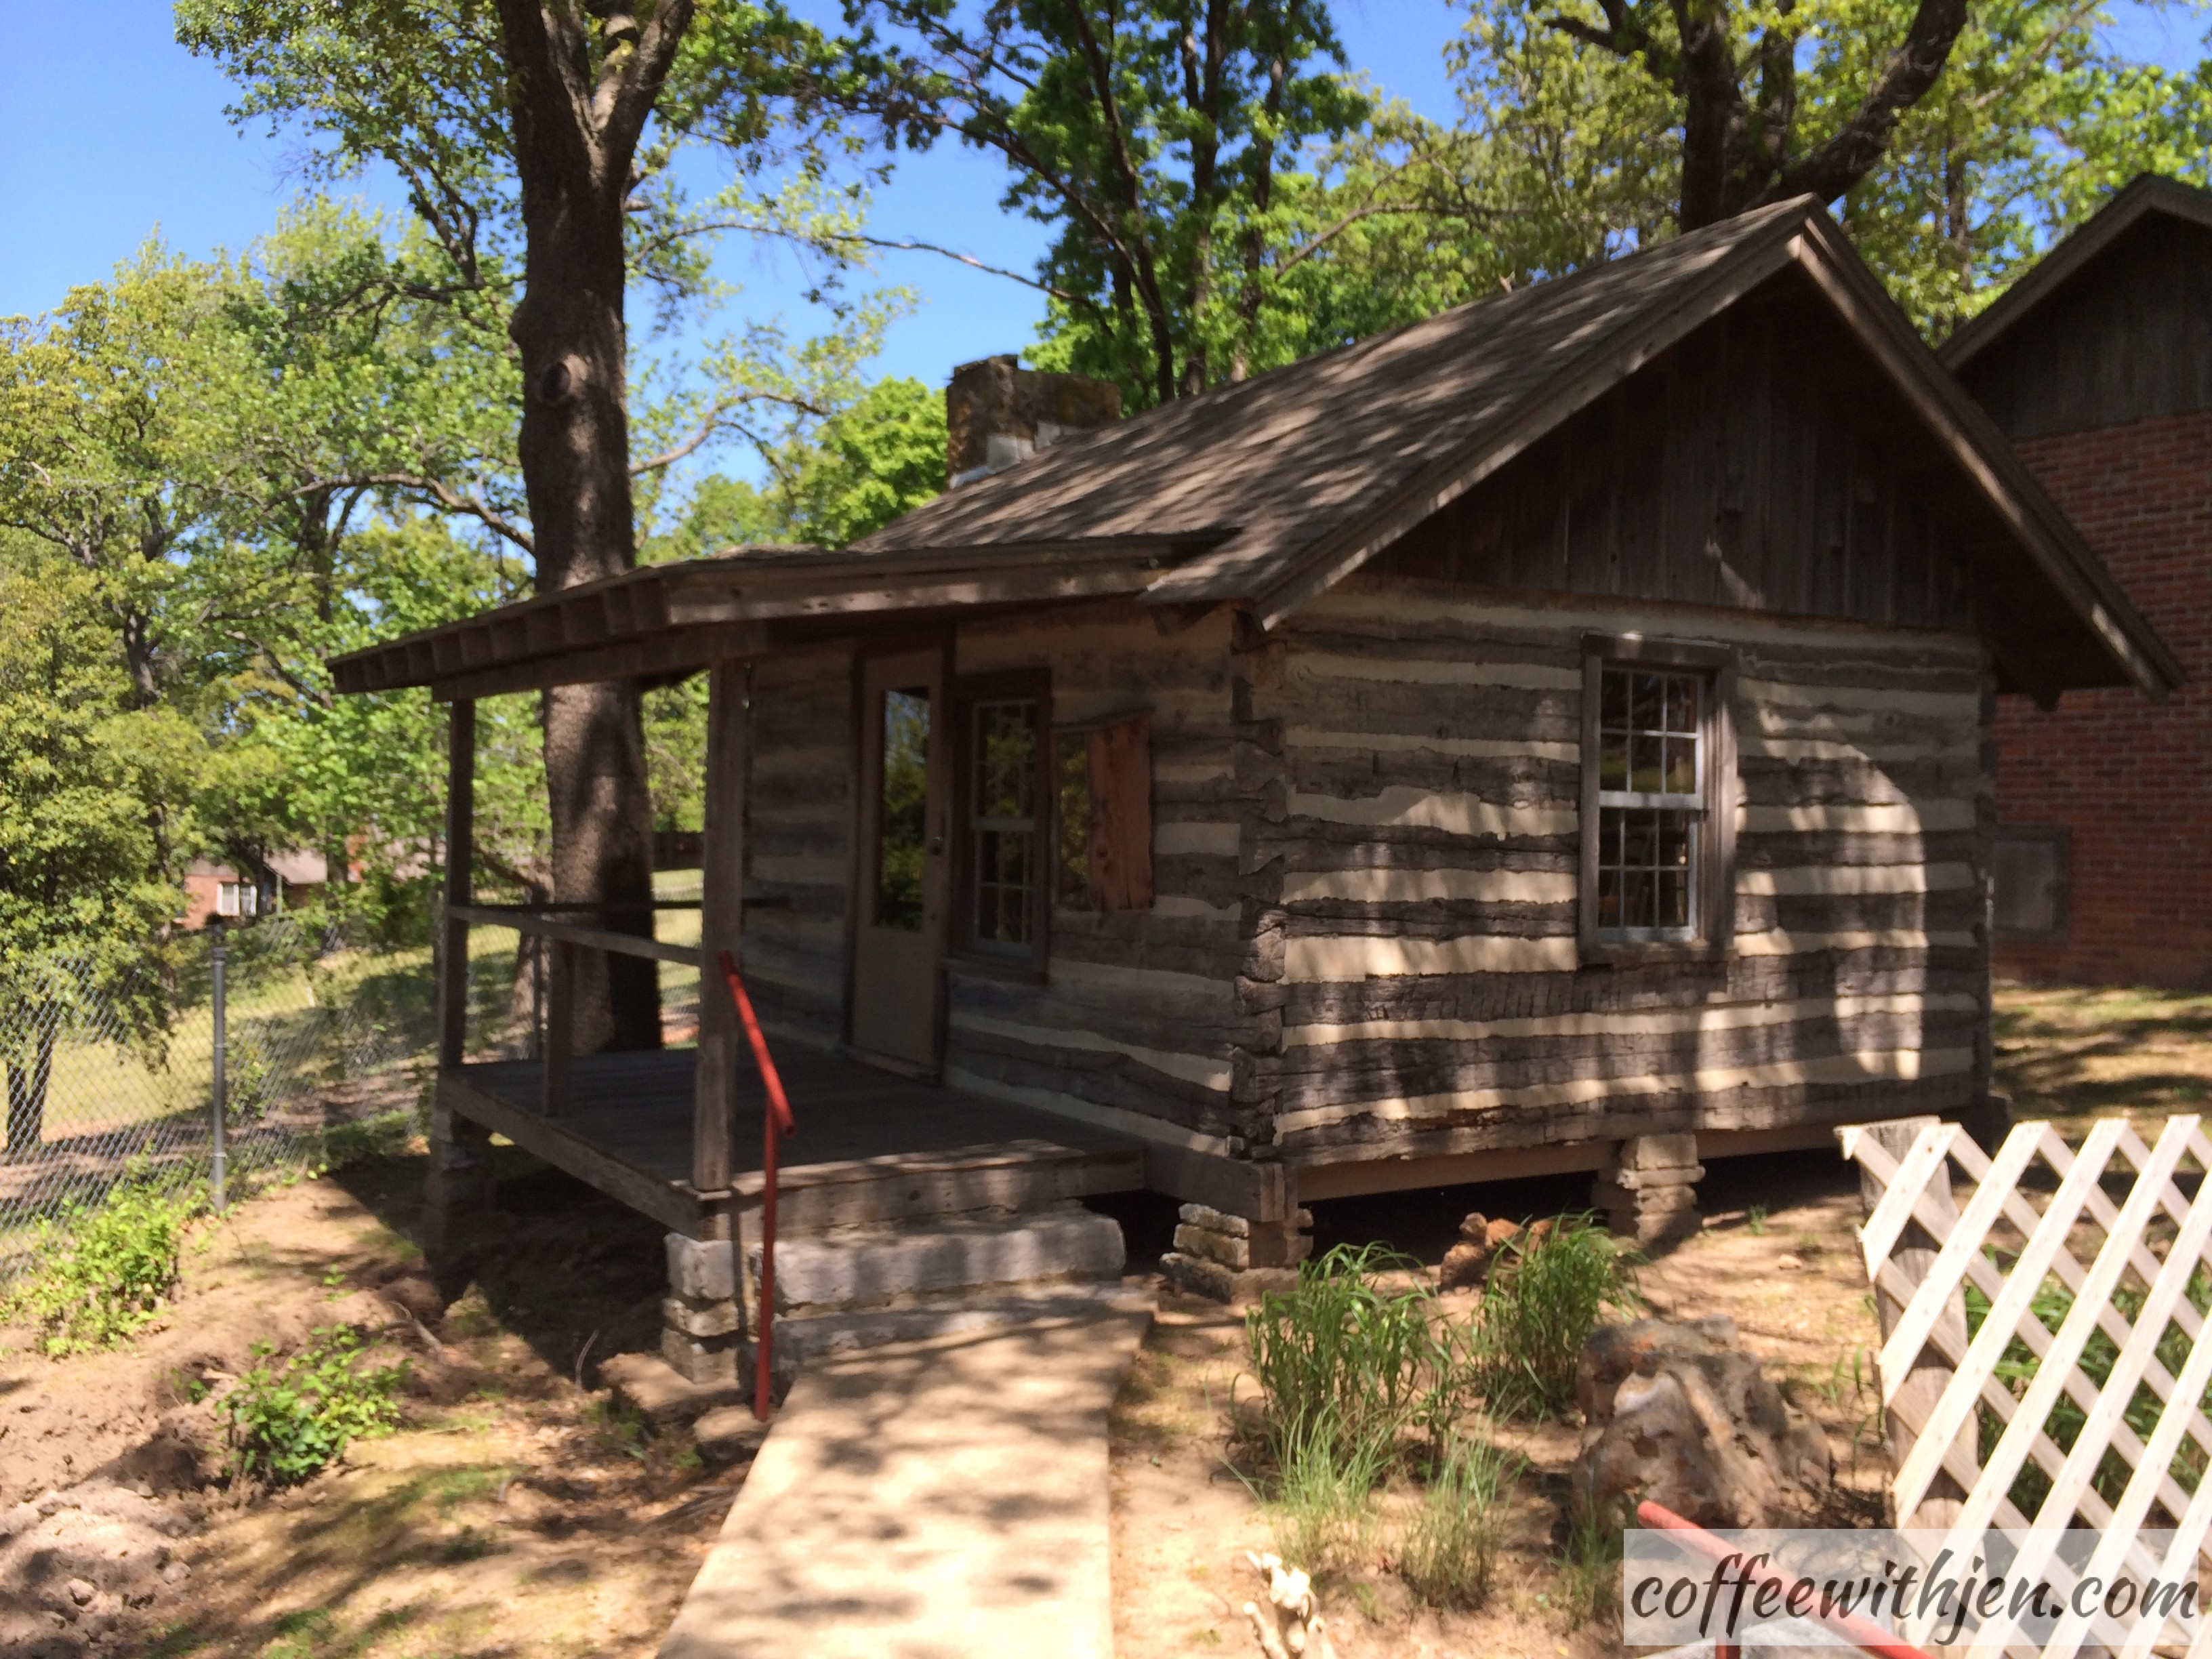 This house was reconstructed from the materials from the Van Winkle house at the Hobbs State Park. See my Spring Break post.  